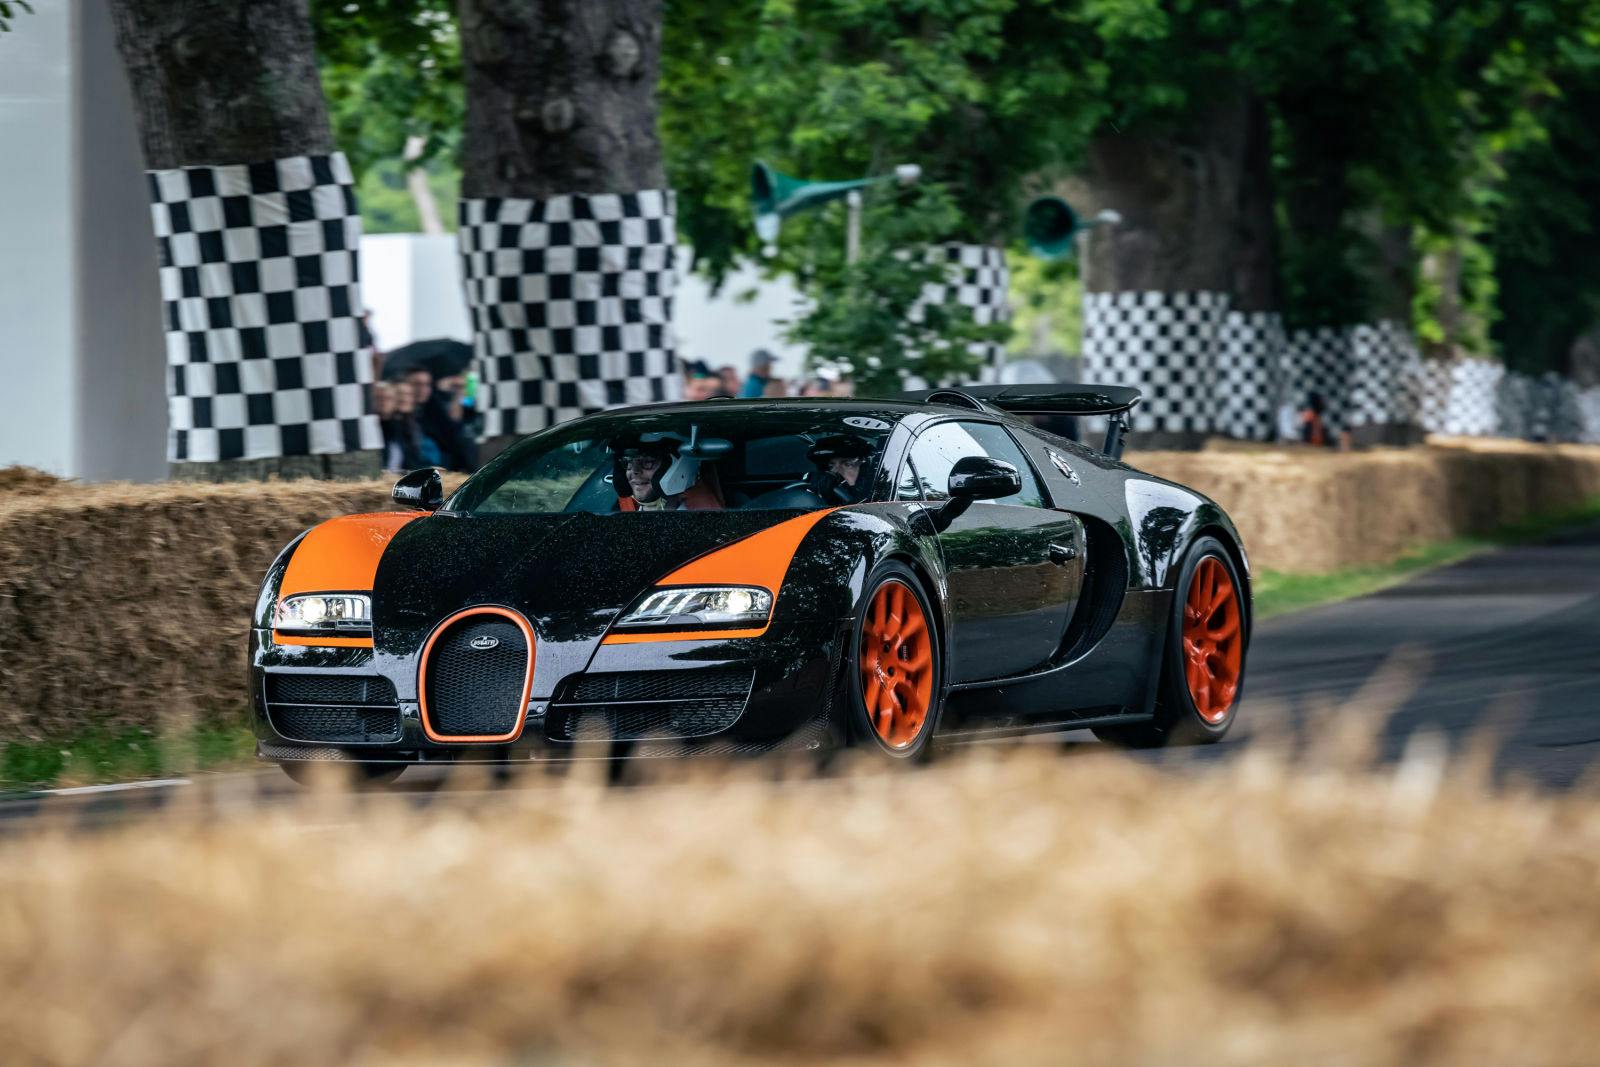 The Bugatti Veyron 16.4 Grand Sport Vitesse set a new world record in 2013 with a top speed of 408.84 km/h. 